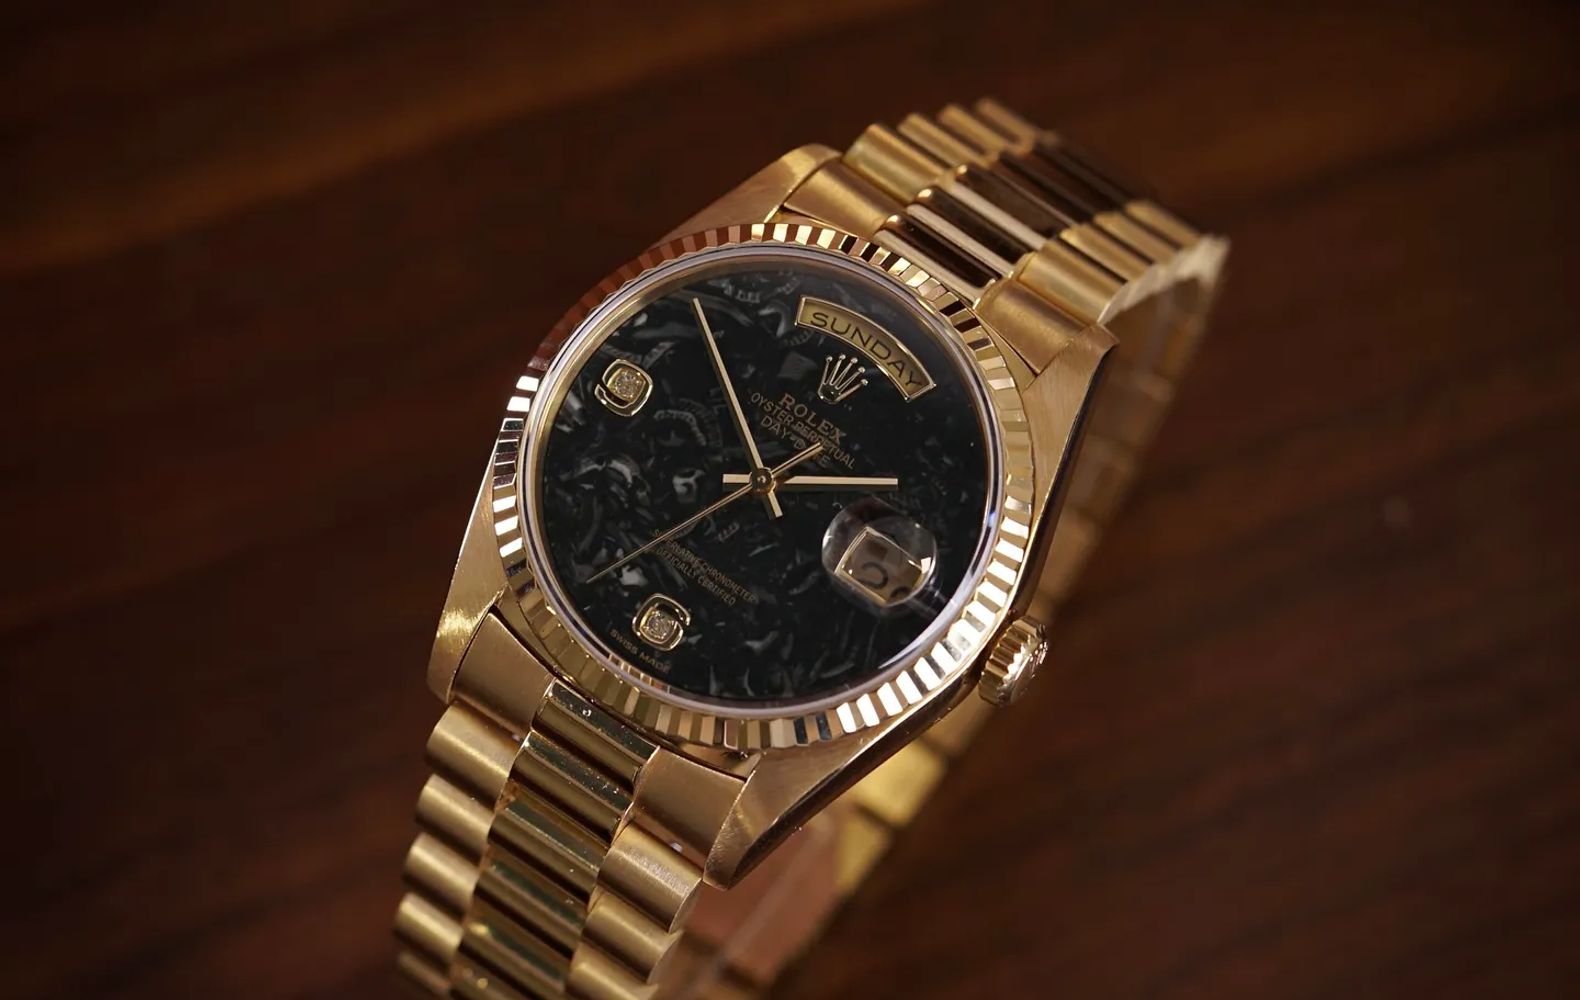 The Rolex Reference Numbers Explained: what do they mean?